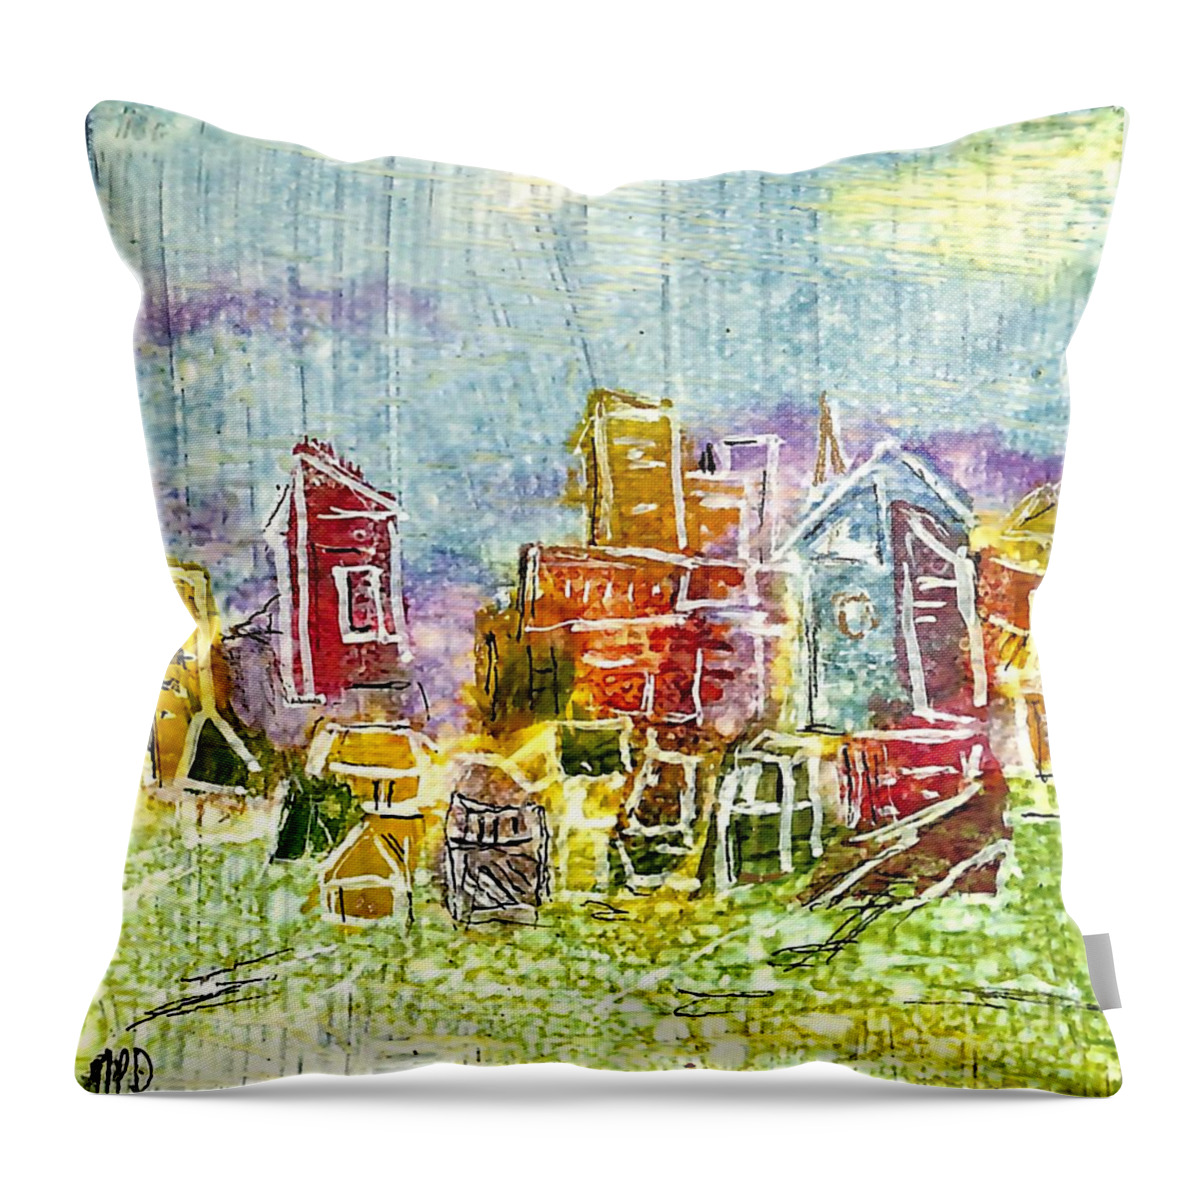 City Scape Throw Pillow featuring the painting 4 Panel Cityscape 3 by Patty Donoghue